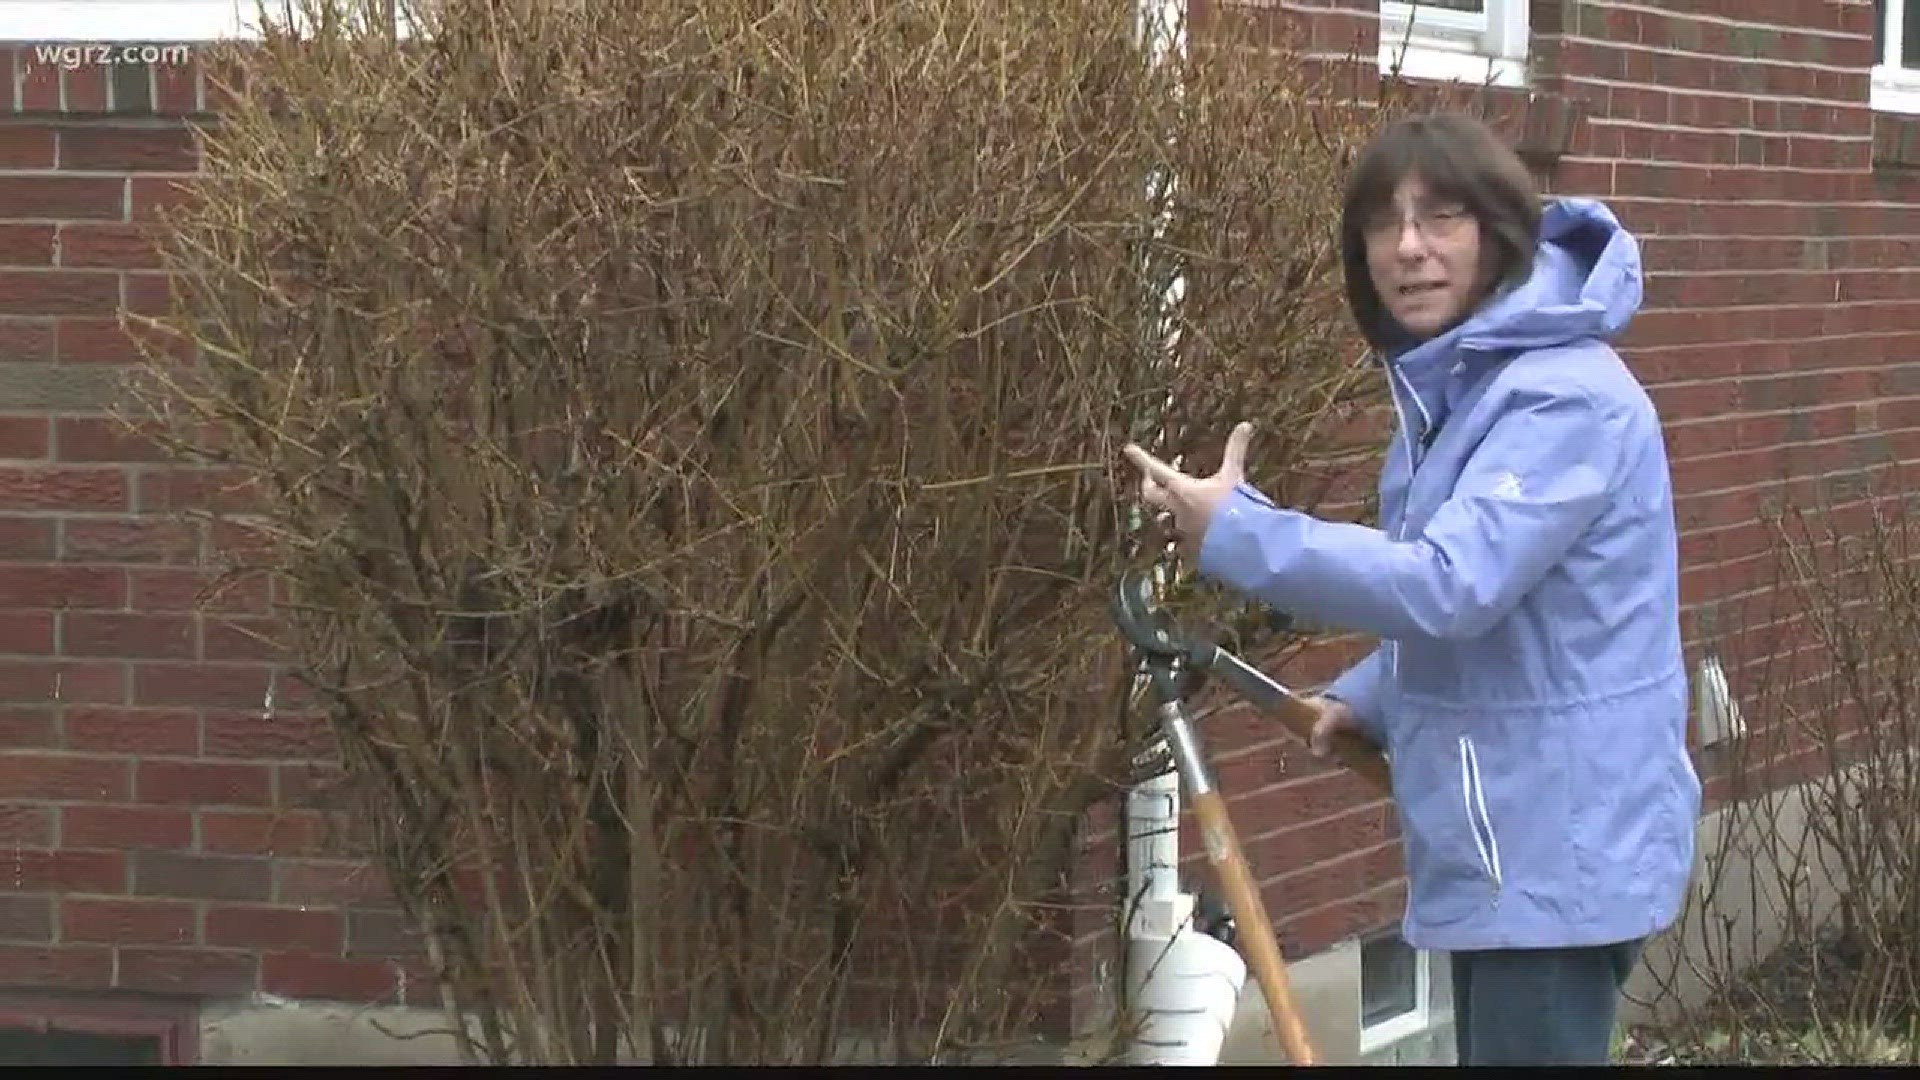 Spring is on its way, so Jackie gave us a refresher on pruning in this week's "2 the Garden."